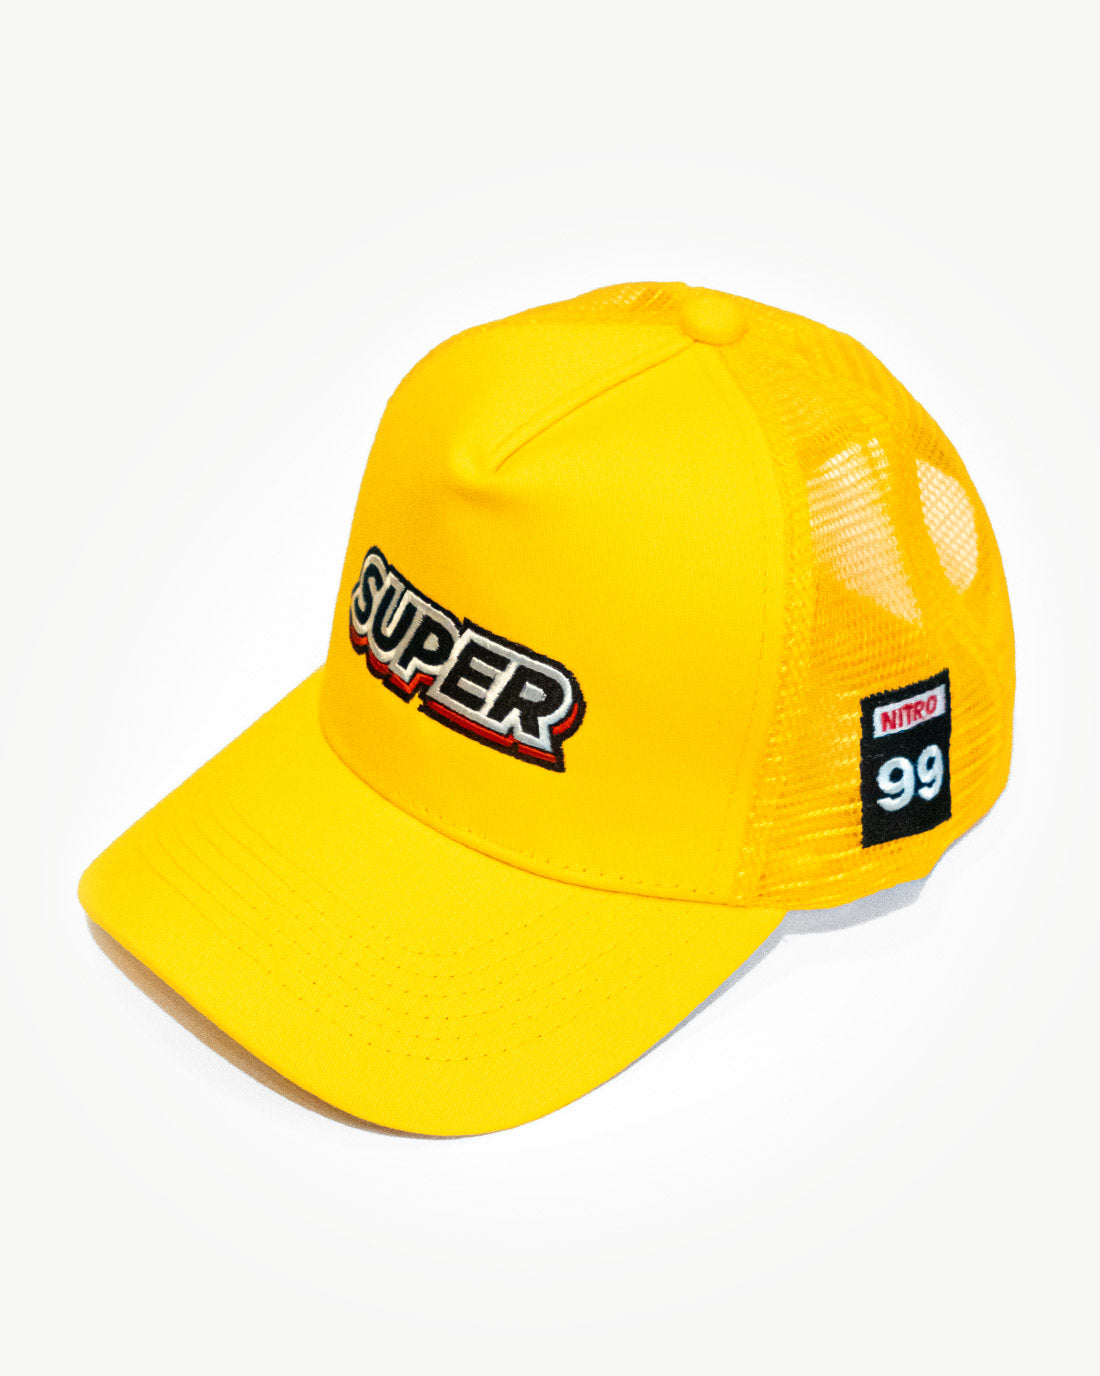 Front side of a super yellow mesh snapback hat with unique patches.